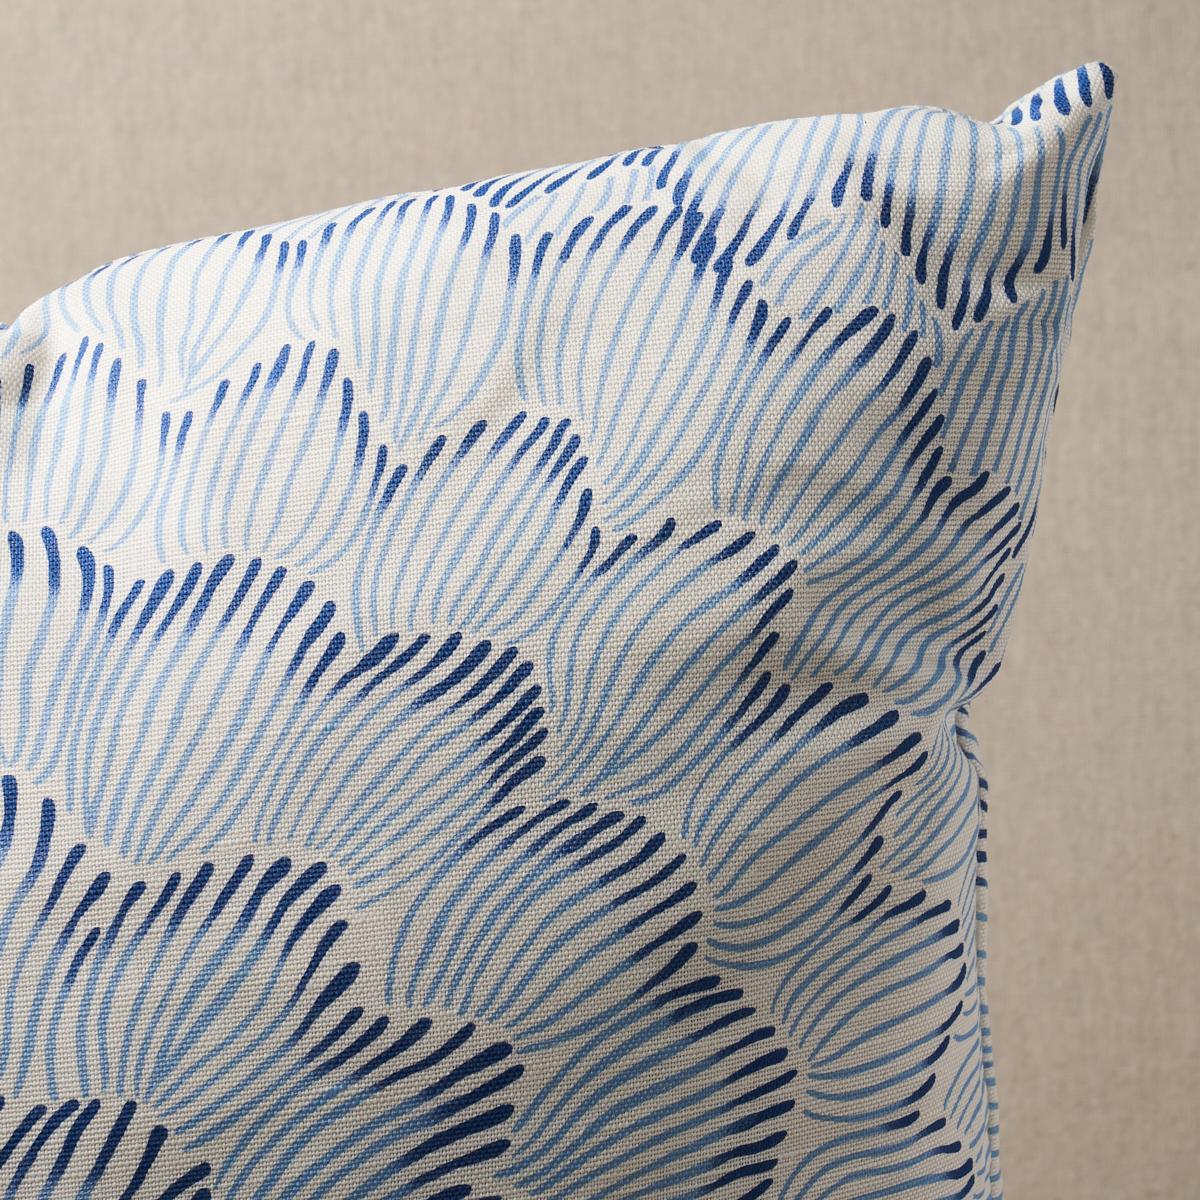 This pillow features Featherbloom by Celerie Kemble for Schumacher with a knife edge finish. Designed by Celerie Kemble, Featherbloom in two blues features a radiating pattern of overscale blossoms that makes a delicate and dreamy statement. The